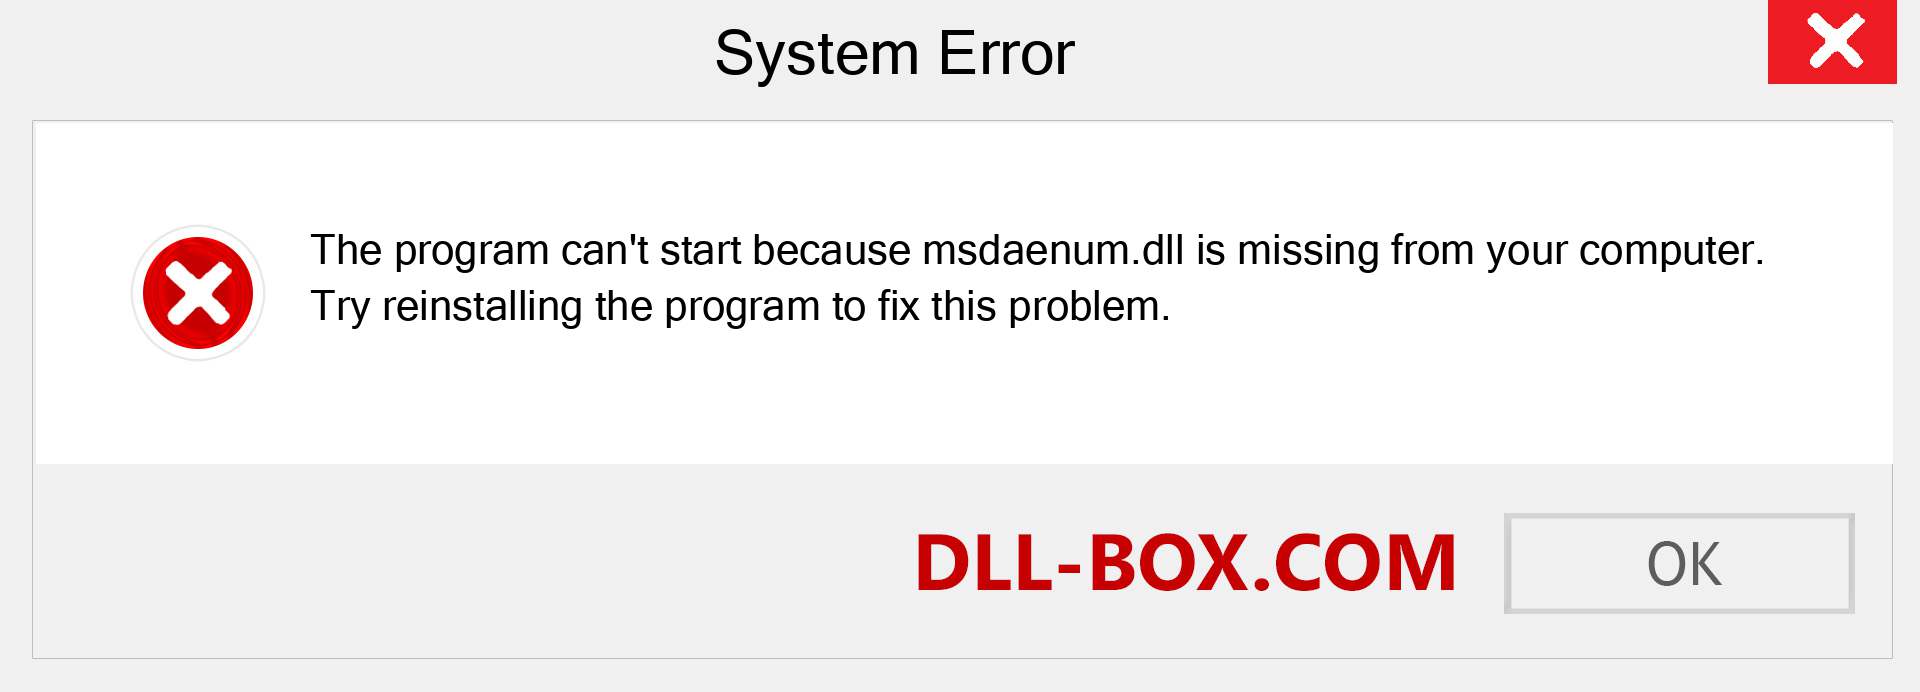  msdaenum.dll file is missing?. Download for Windows 7, 8, 10 - Fix  msdaenum dll Missing Error on Windows, photos, images